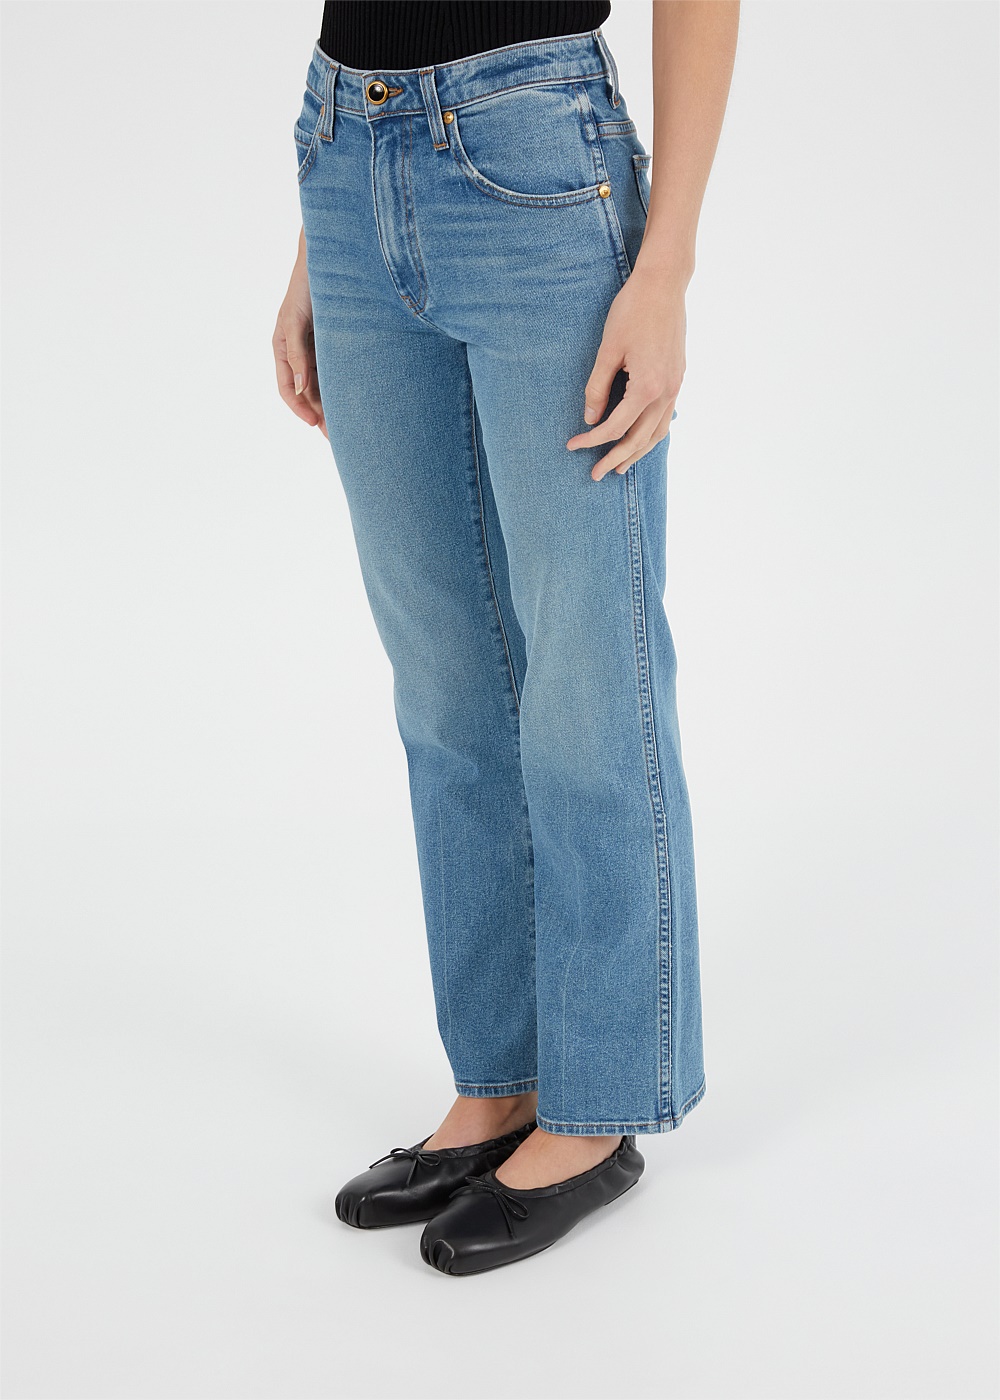 New This Week - Vivian Cropped Bootcut Jeans